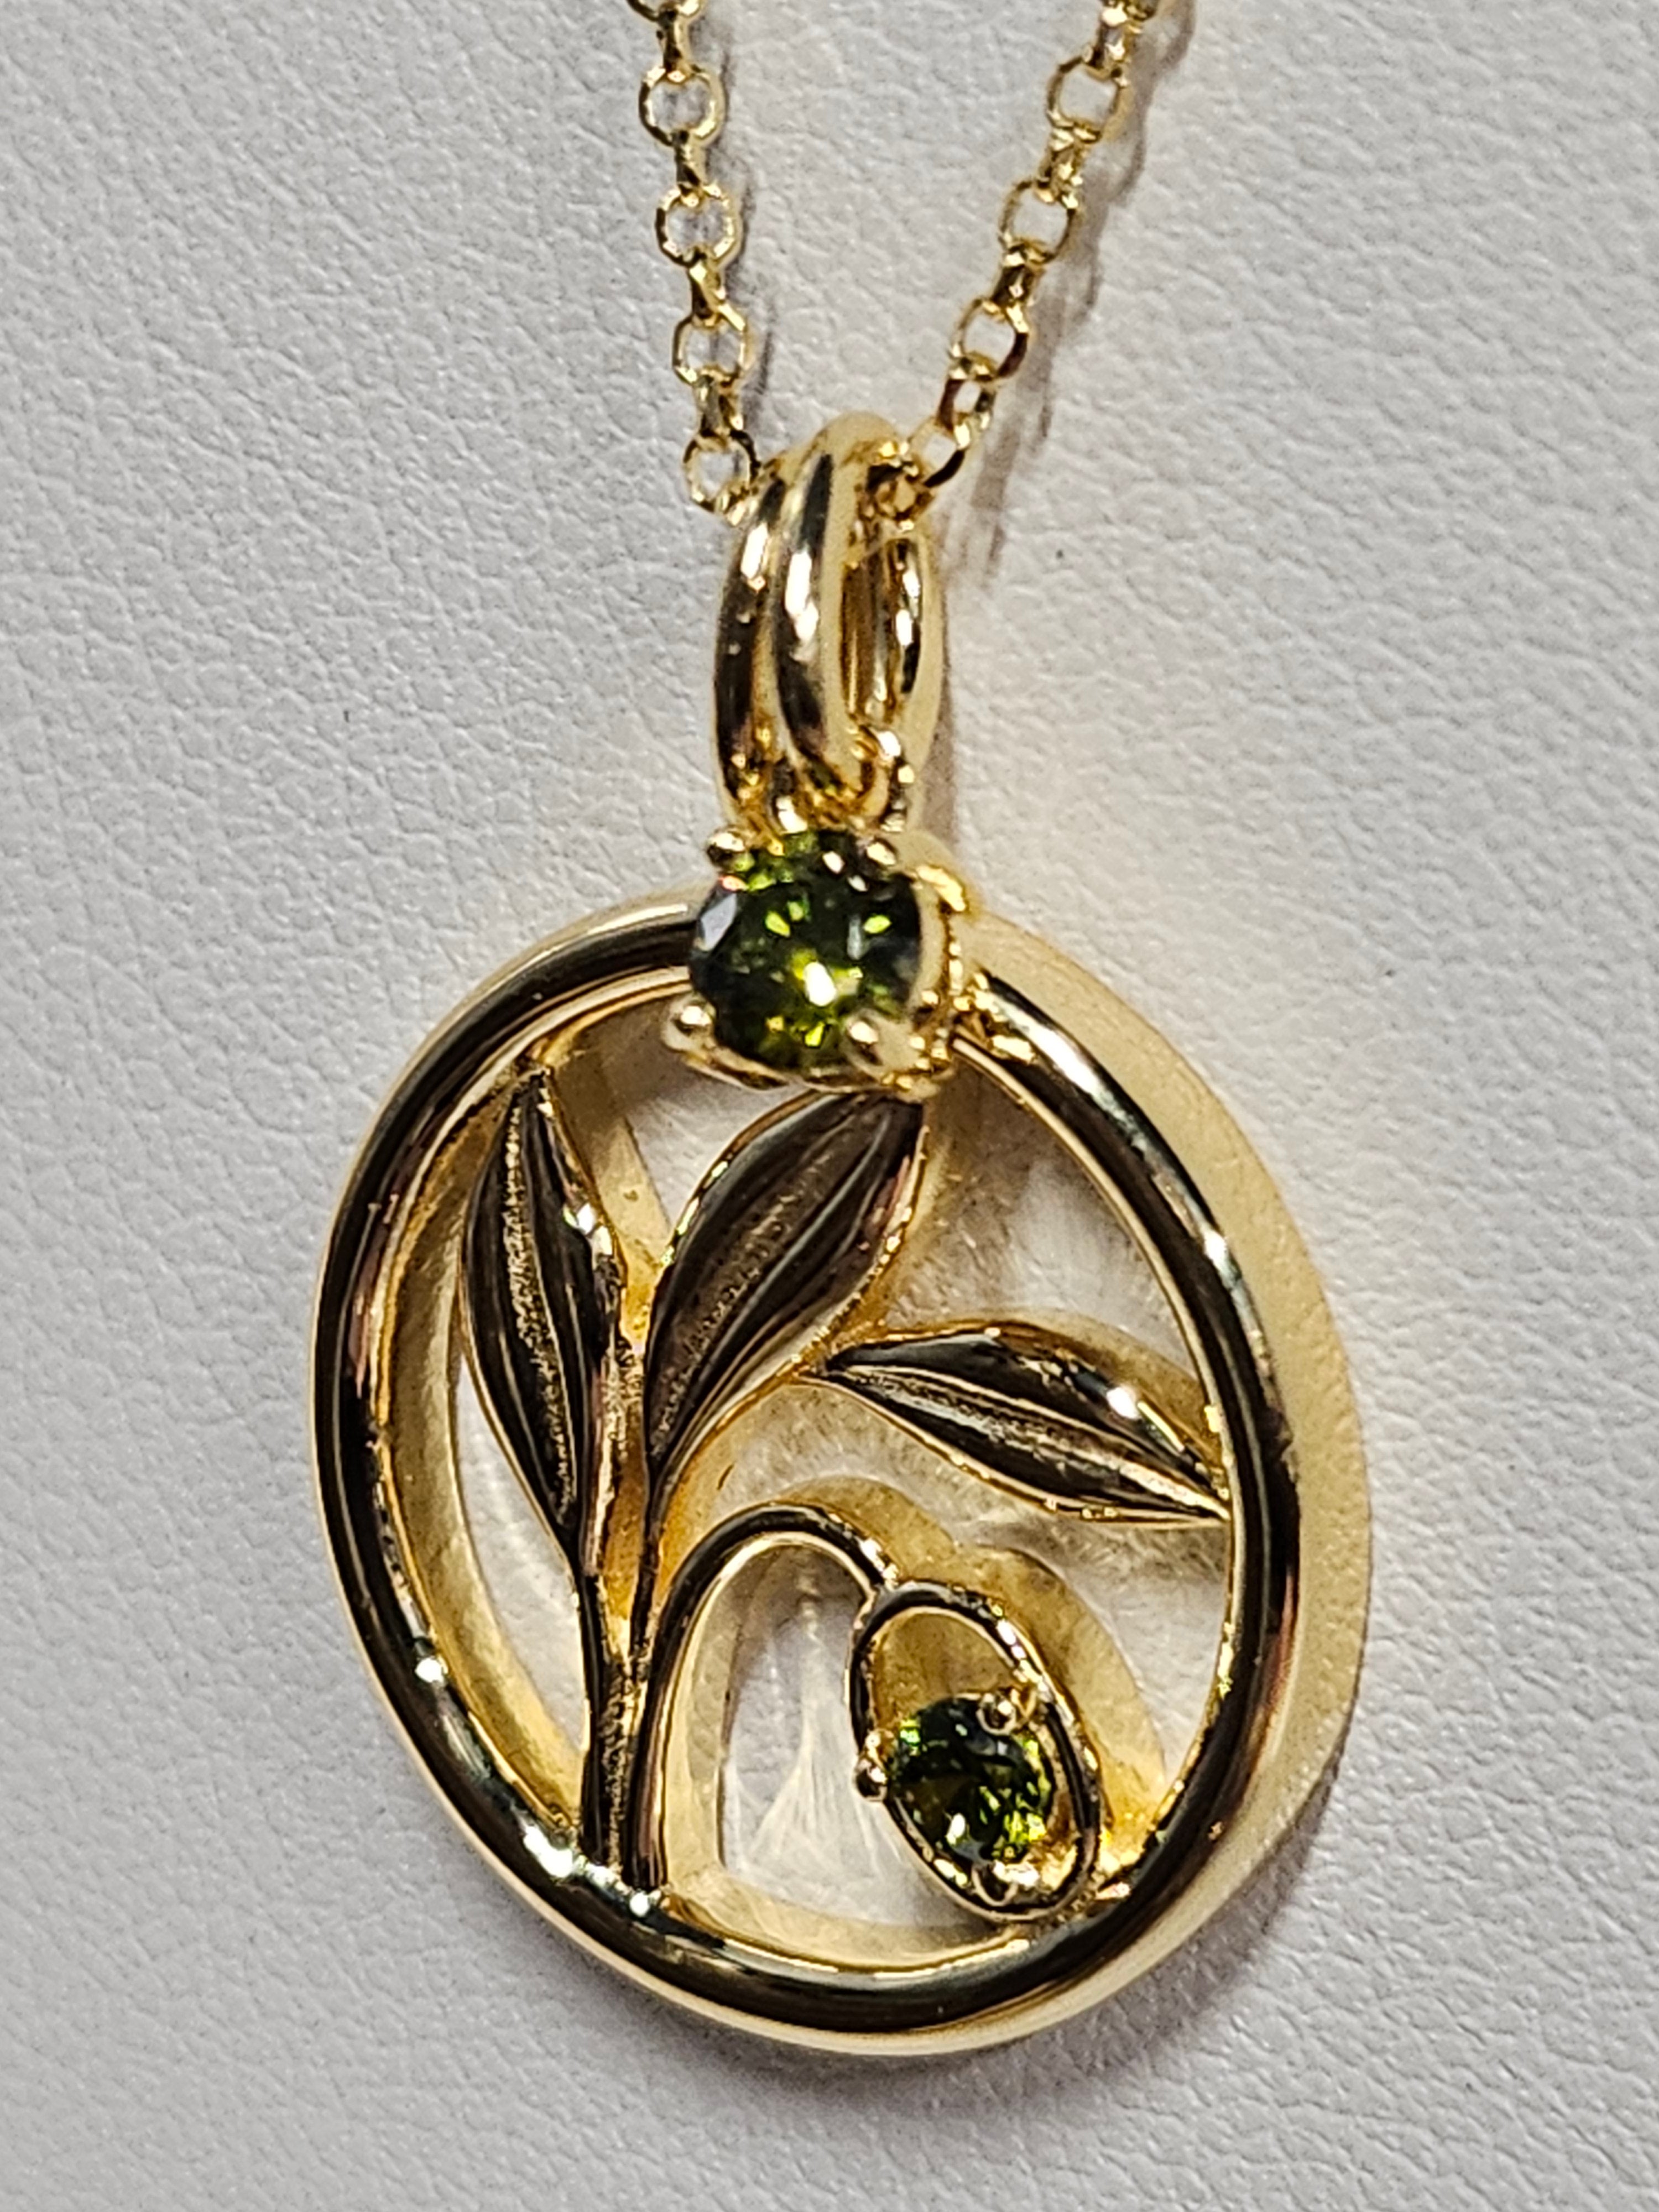 Reign S/SPendant - Olive - Gold-plated